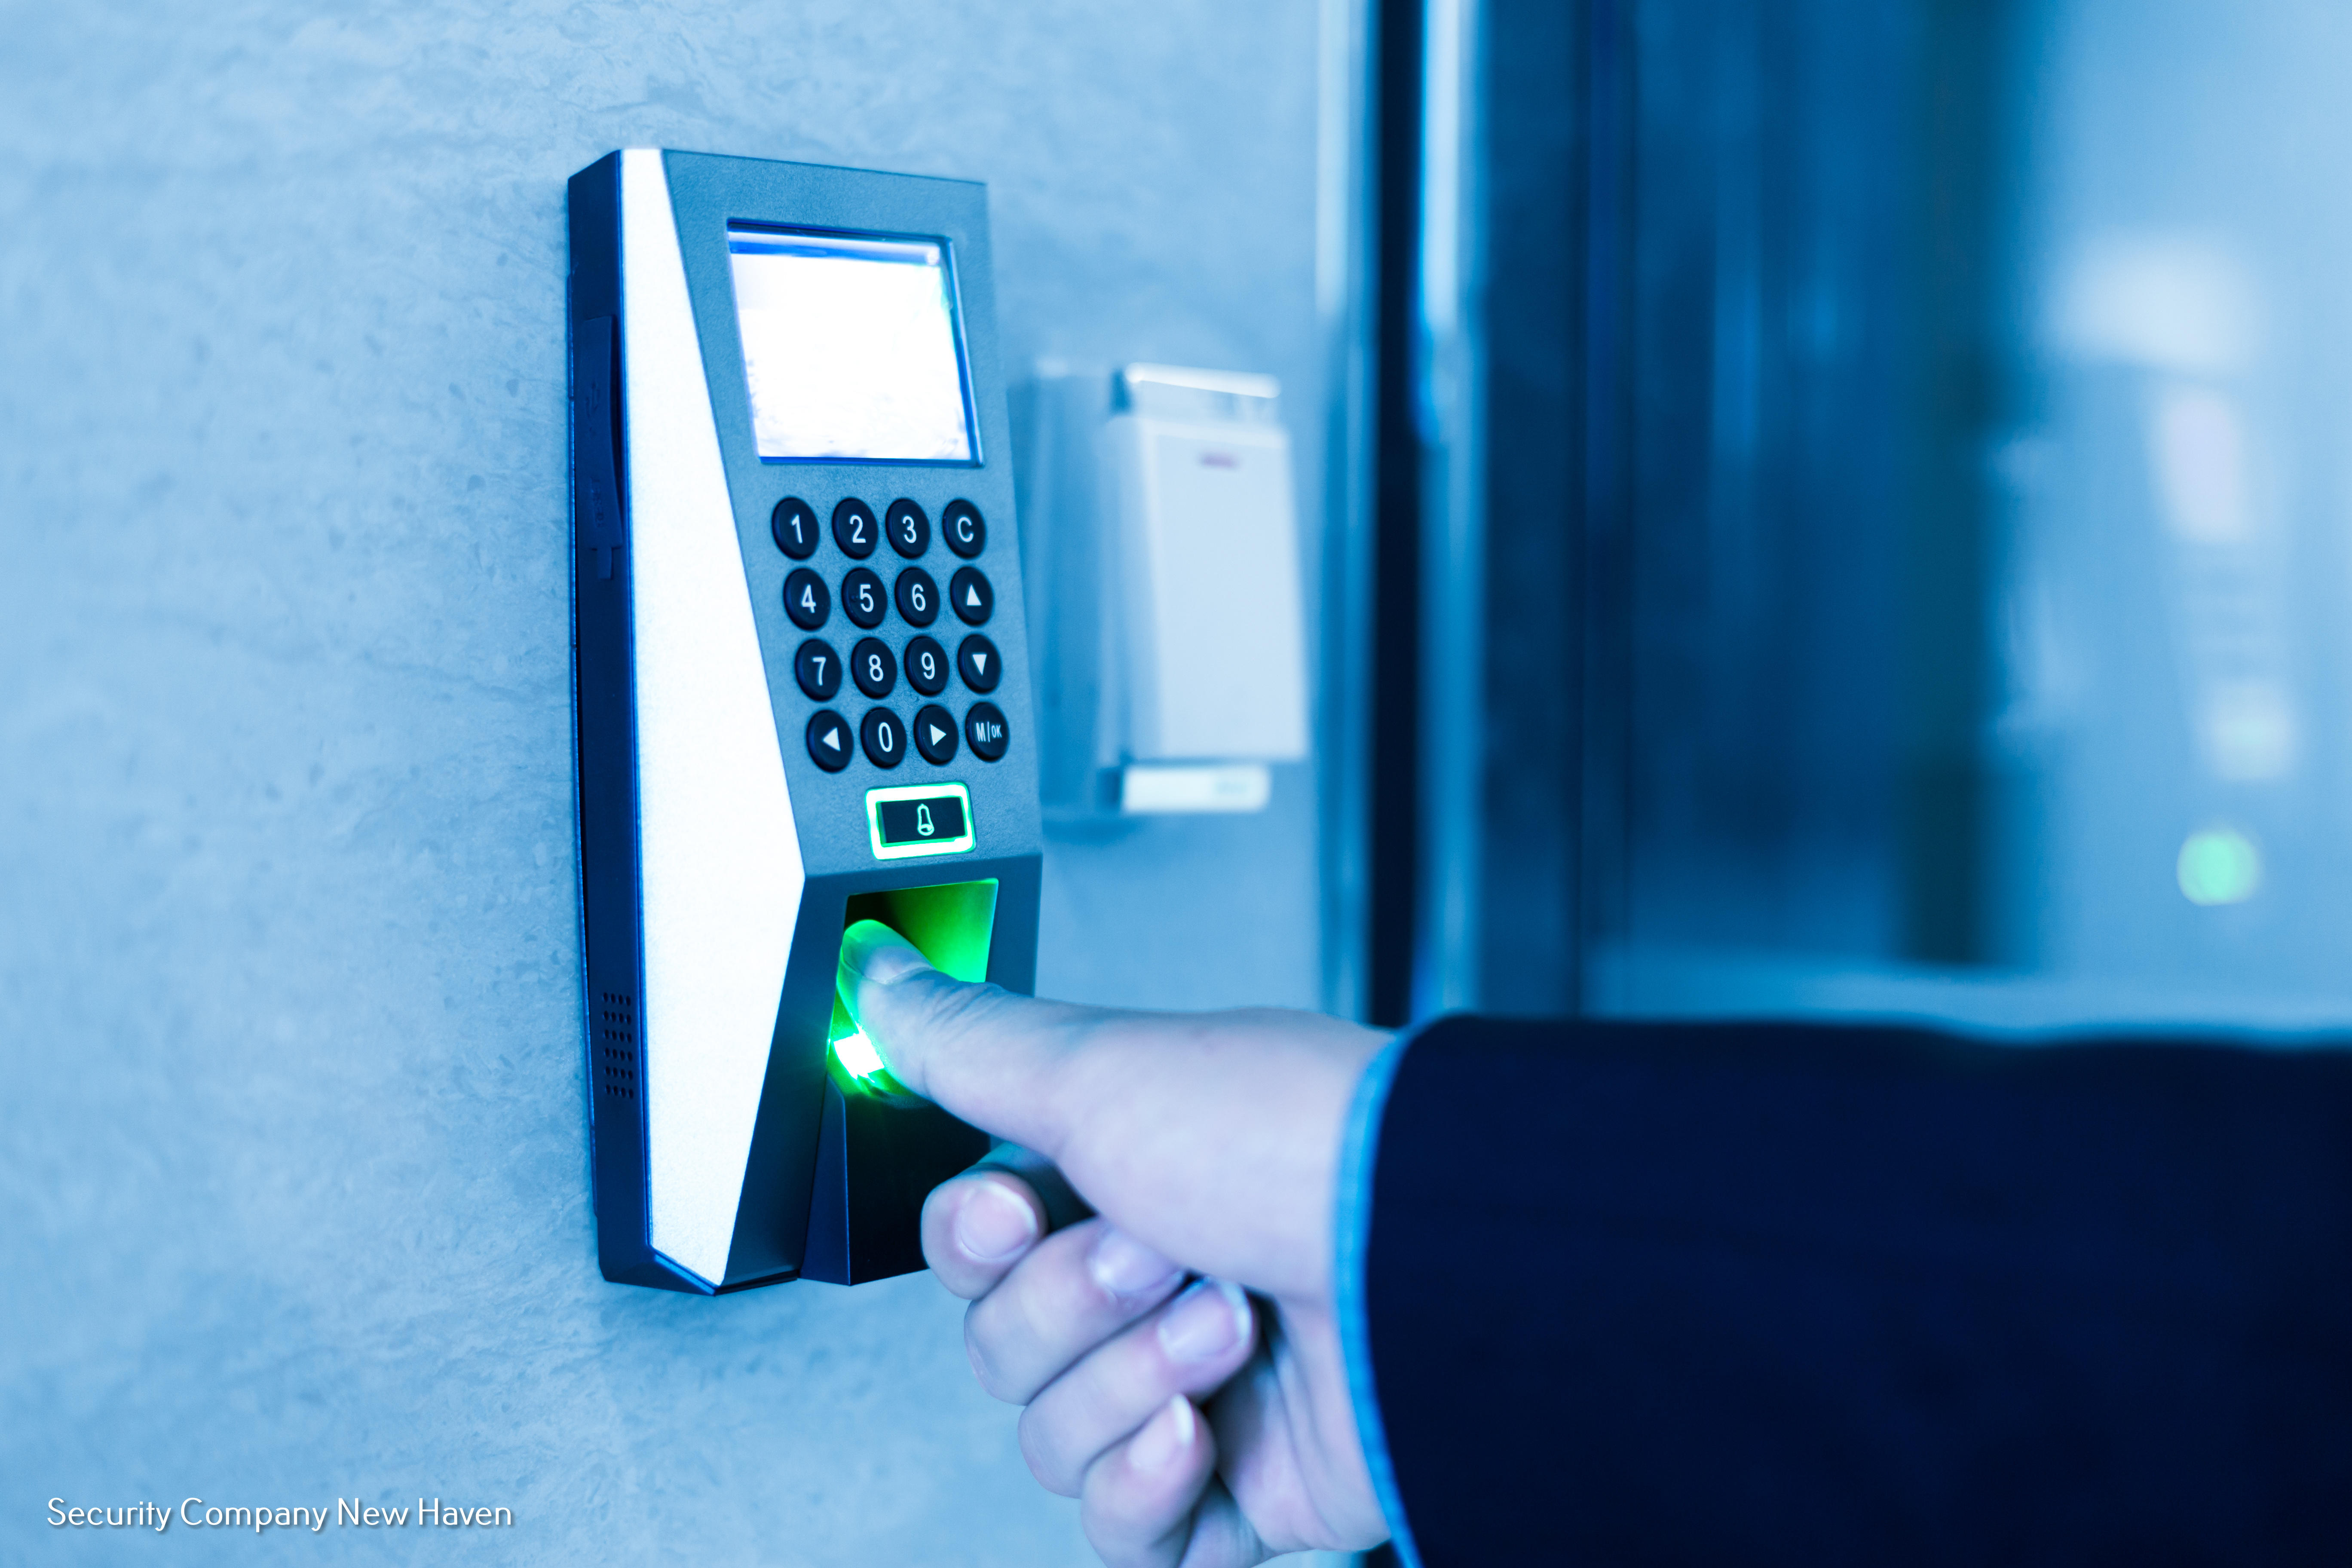 Mammoth Security Inc. New Haven Explains the Reasons to Invest in a Dependable Security System